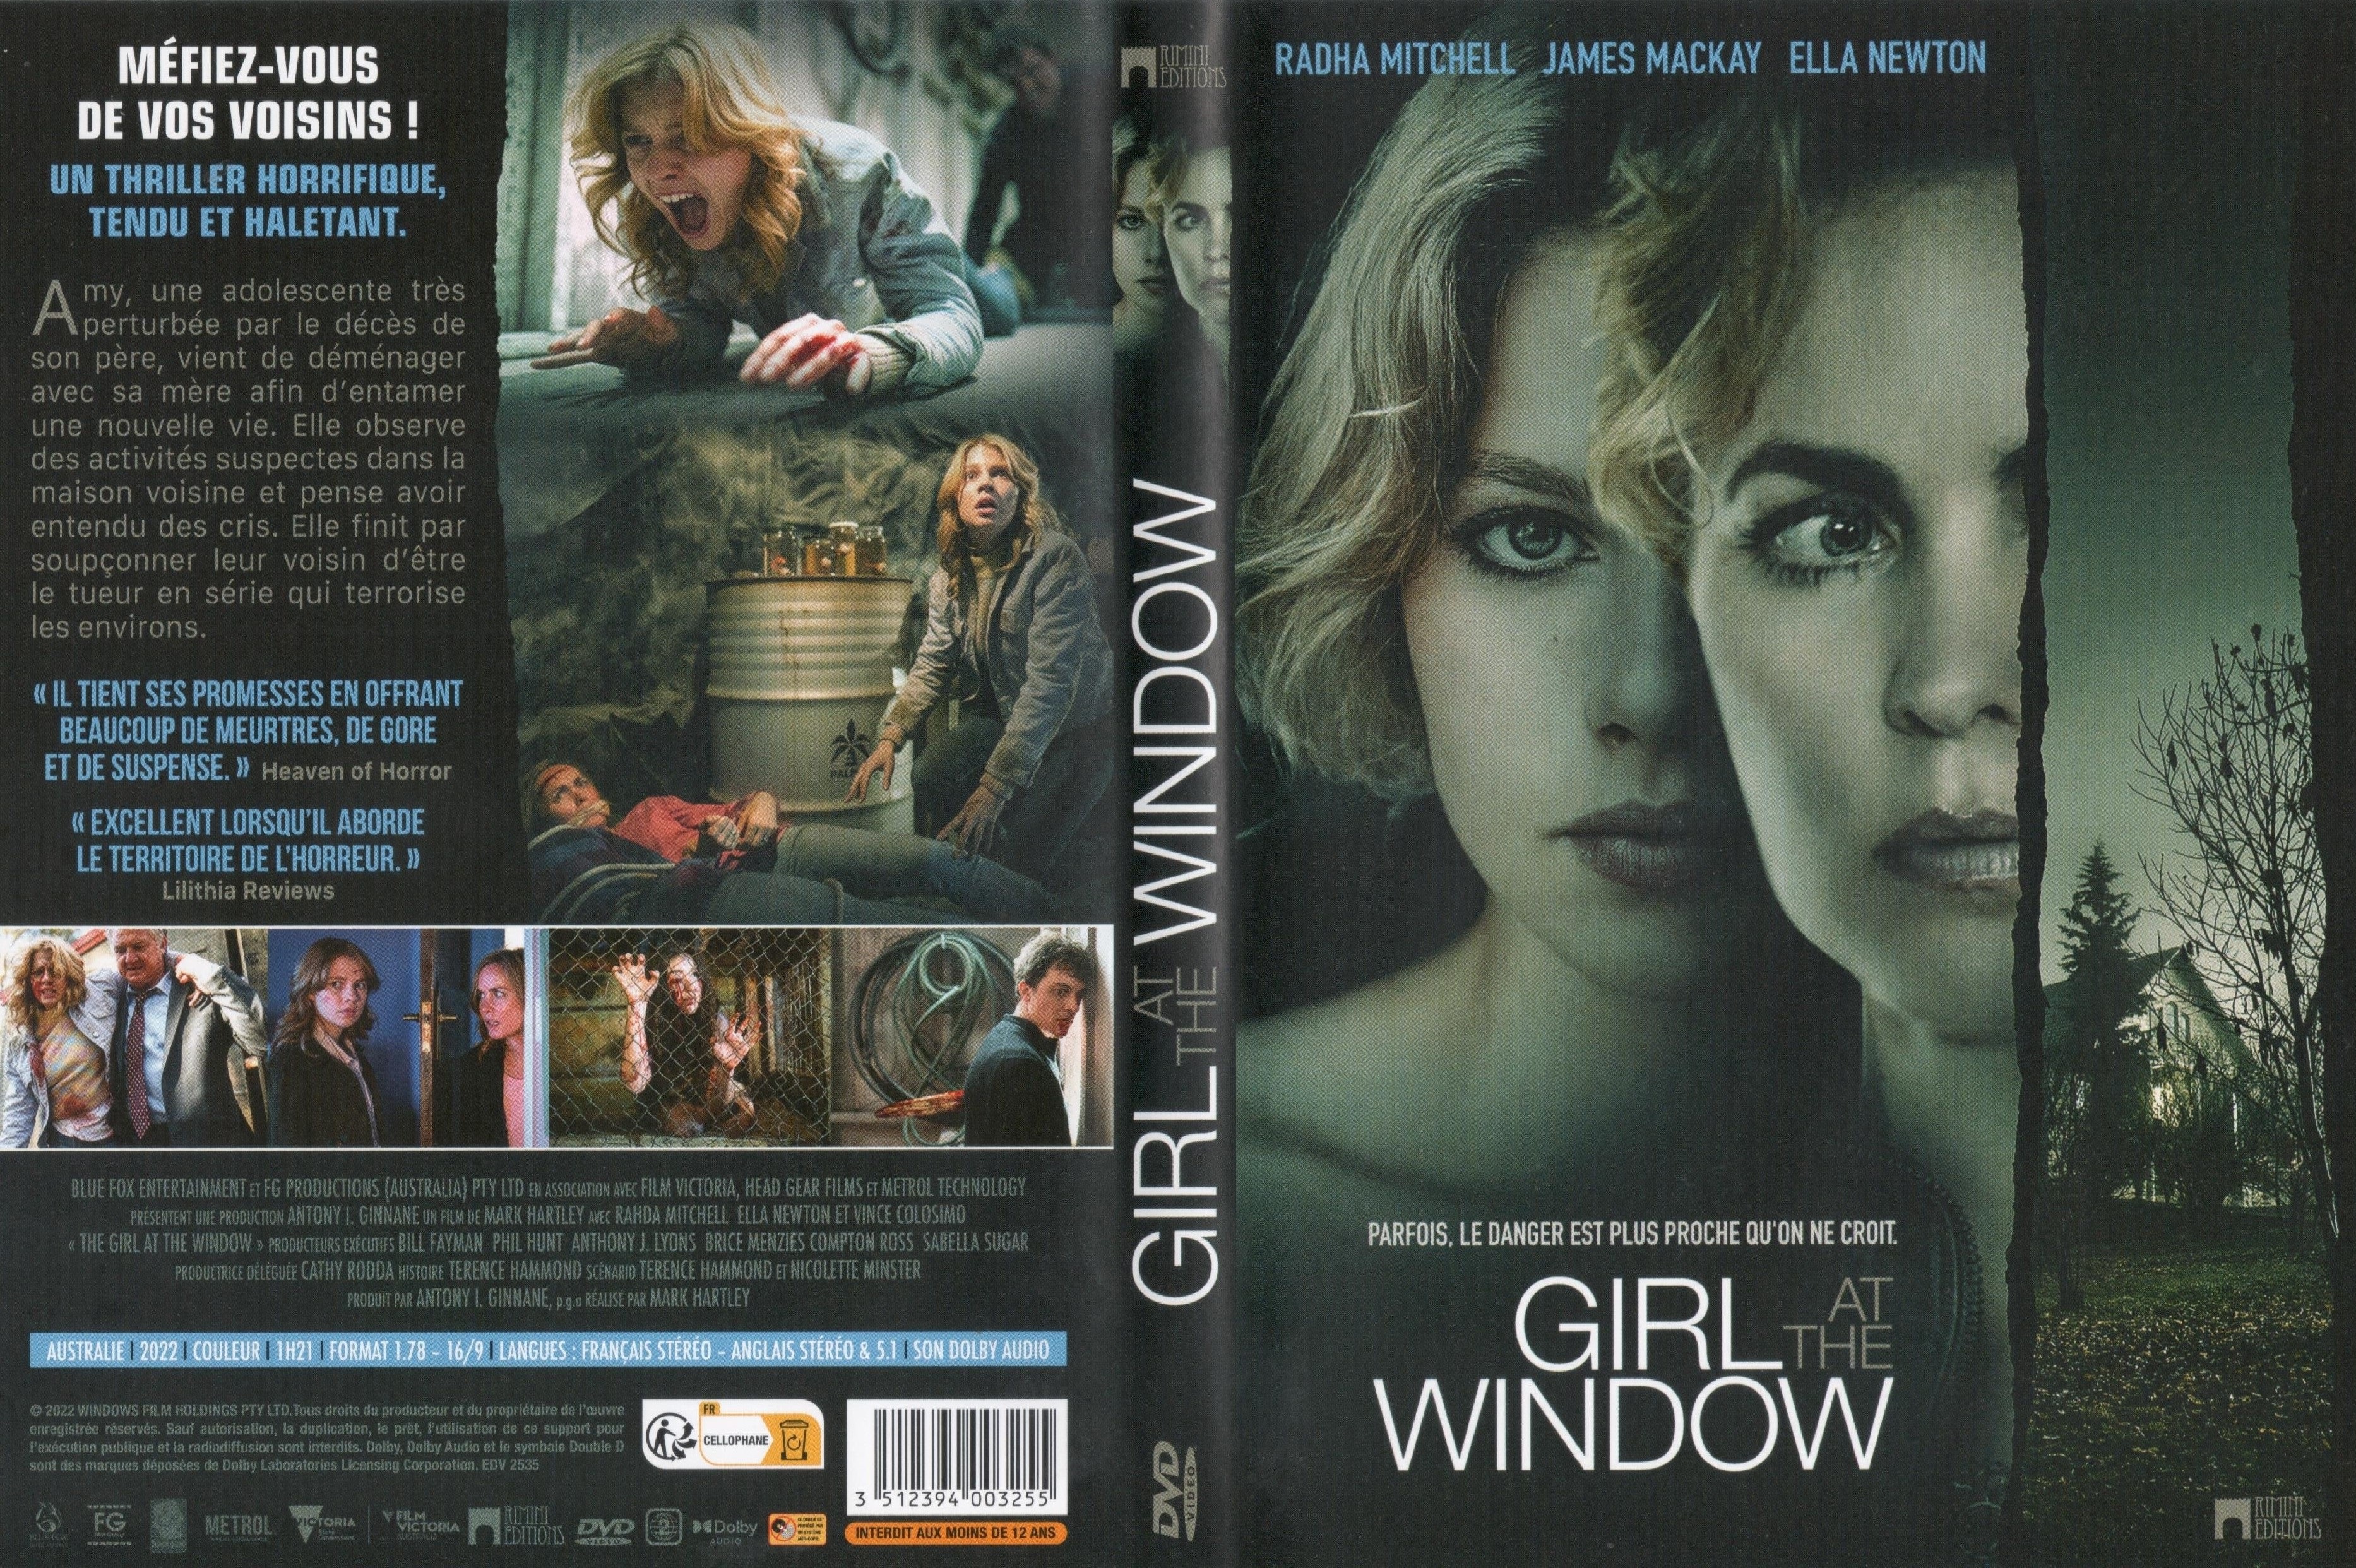 Jaquette DVD Girl at the window